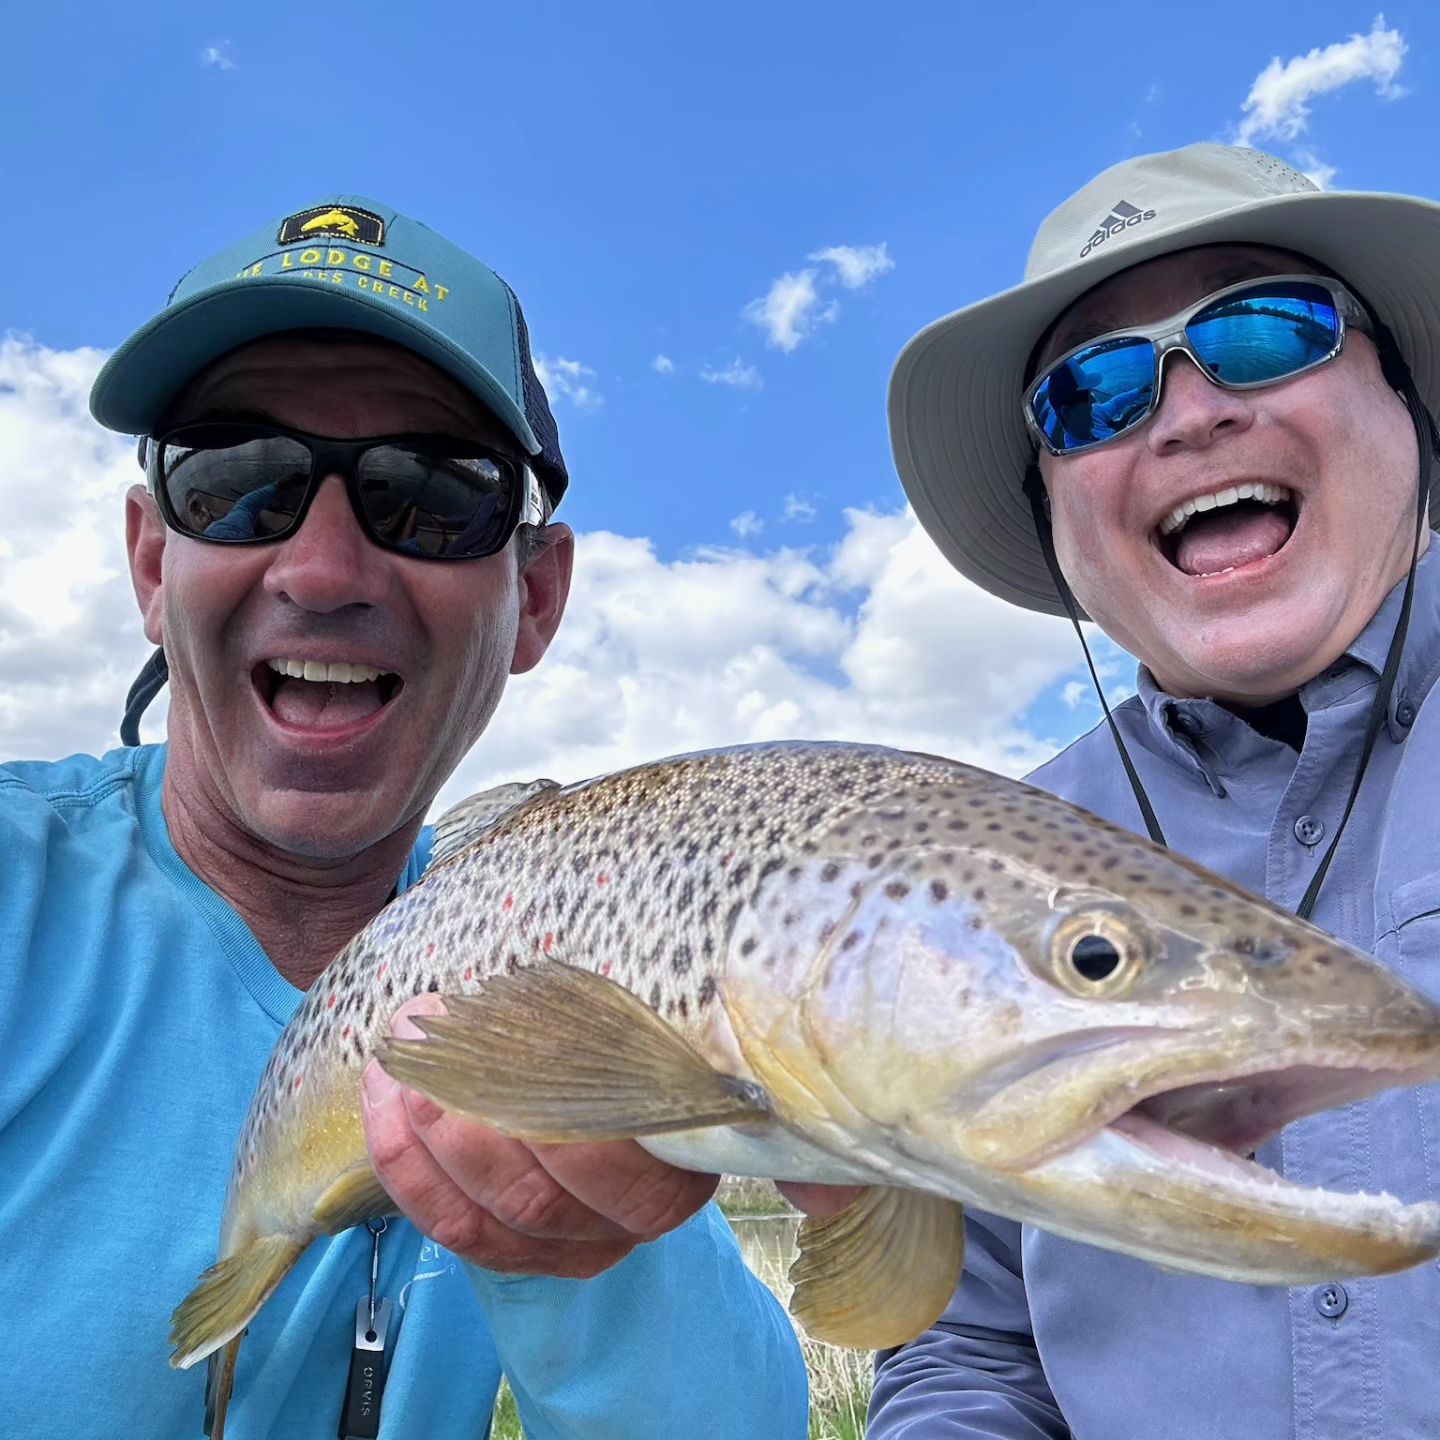 Fly fishing guide Josh Jablow with brown trout and his client.